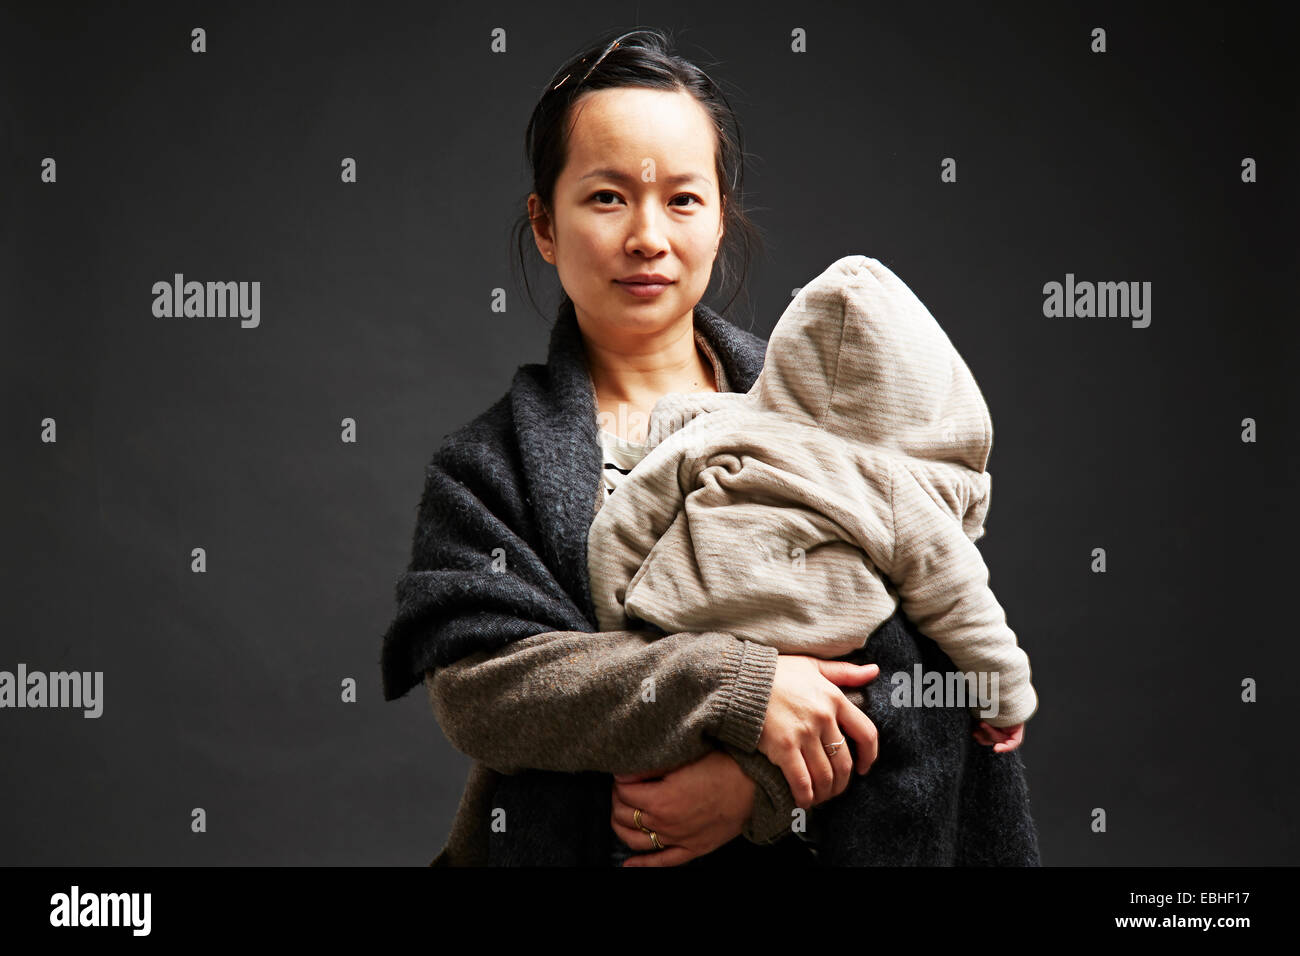 Studio portrait of mid adult woman holding baby son Banque D'Images